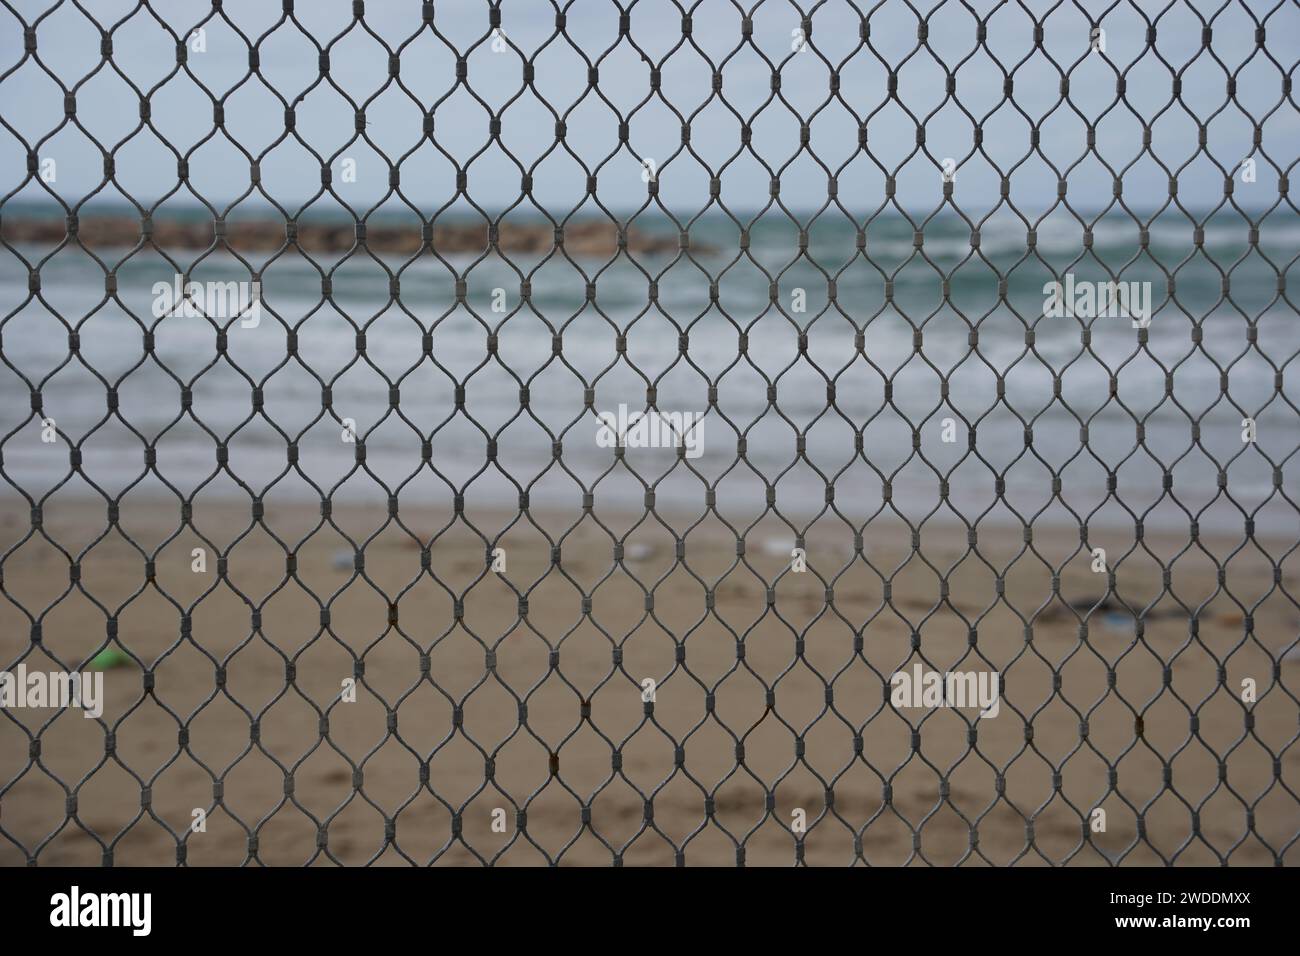 View of the winter beach through a mesh net fence. Mediterranean coast from behind metal wire fence. Stock Photo